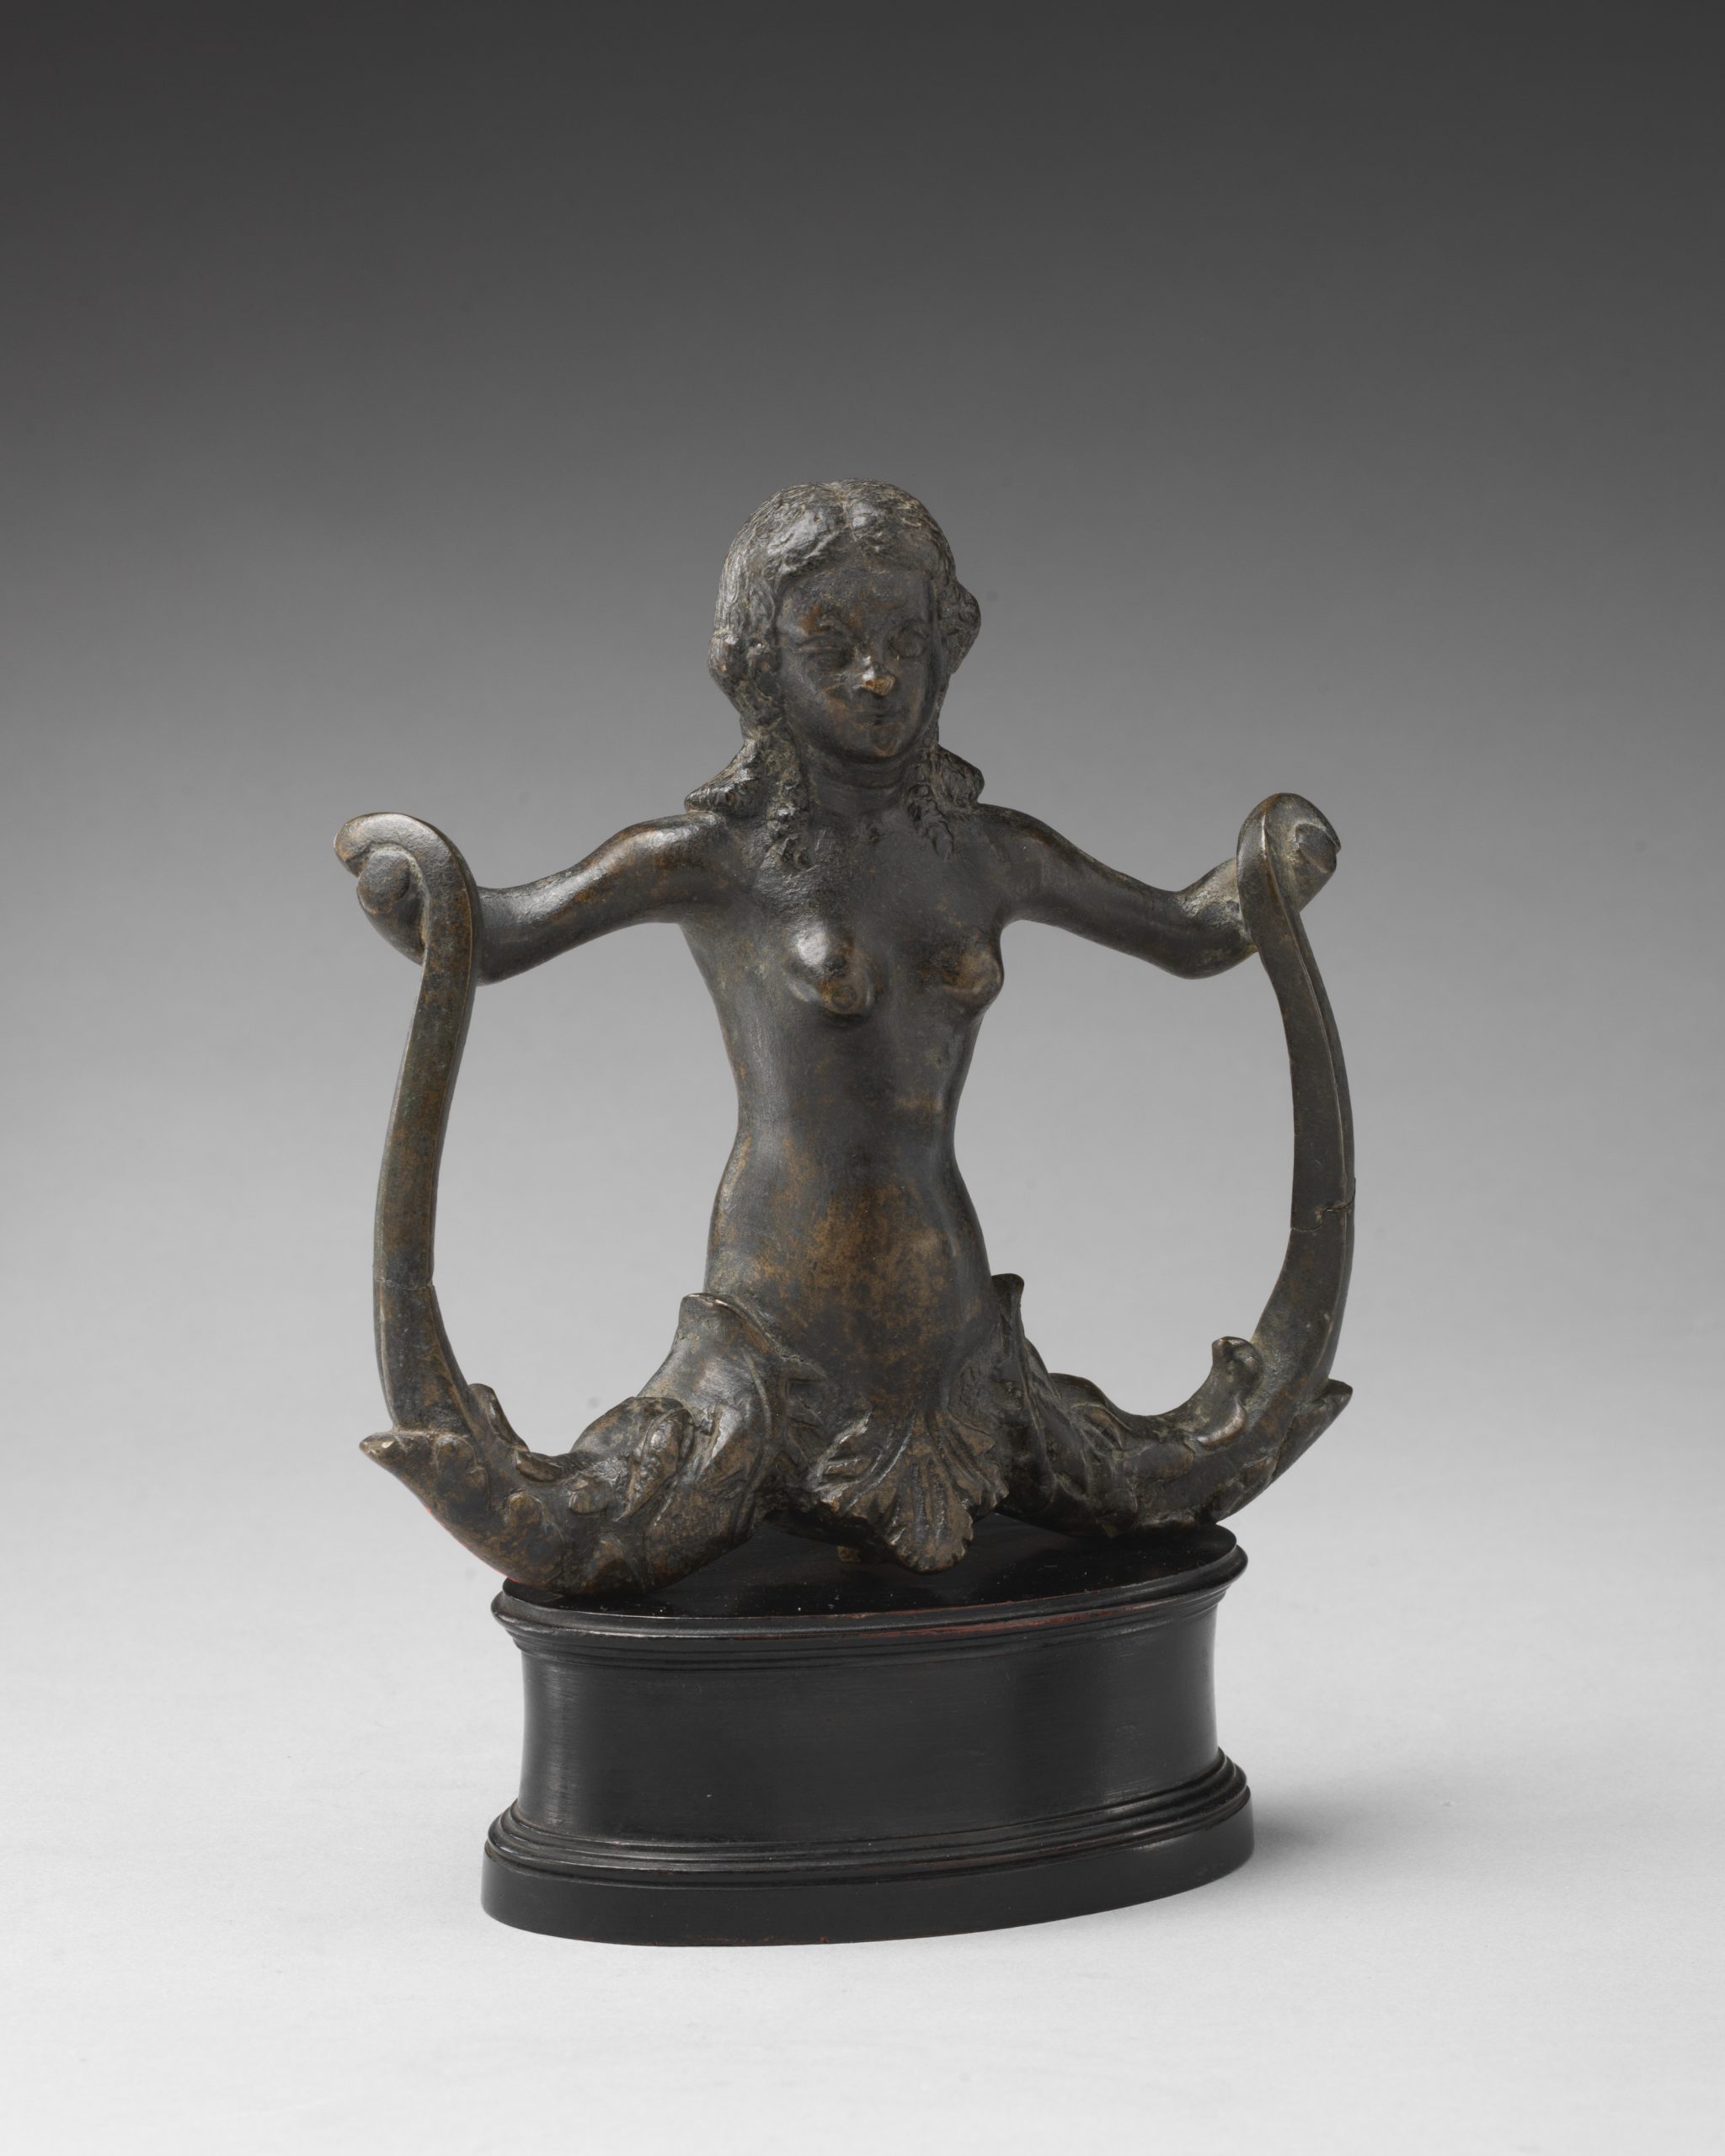 A bronze sculpture of a mermaid holding its bisected tail in each hand with arms outstretched on a pedestal